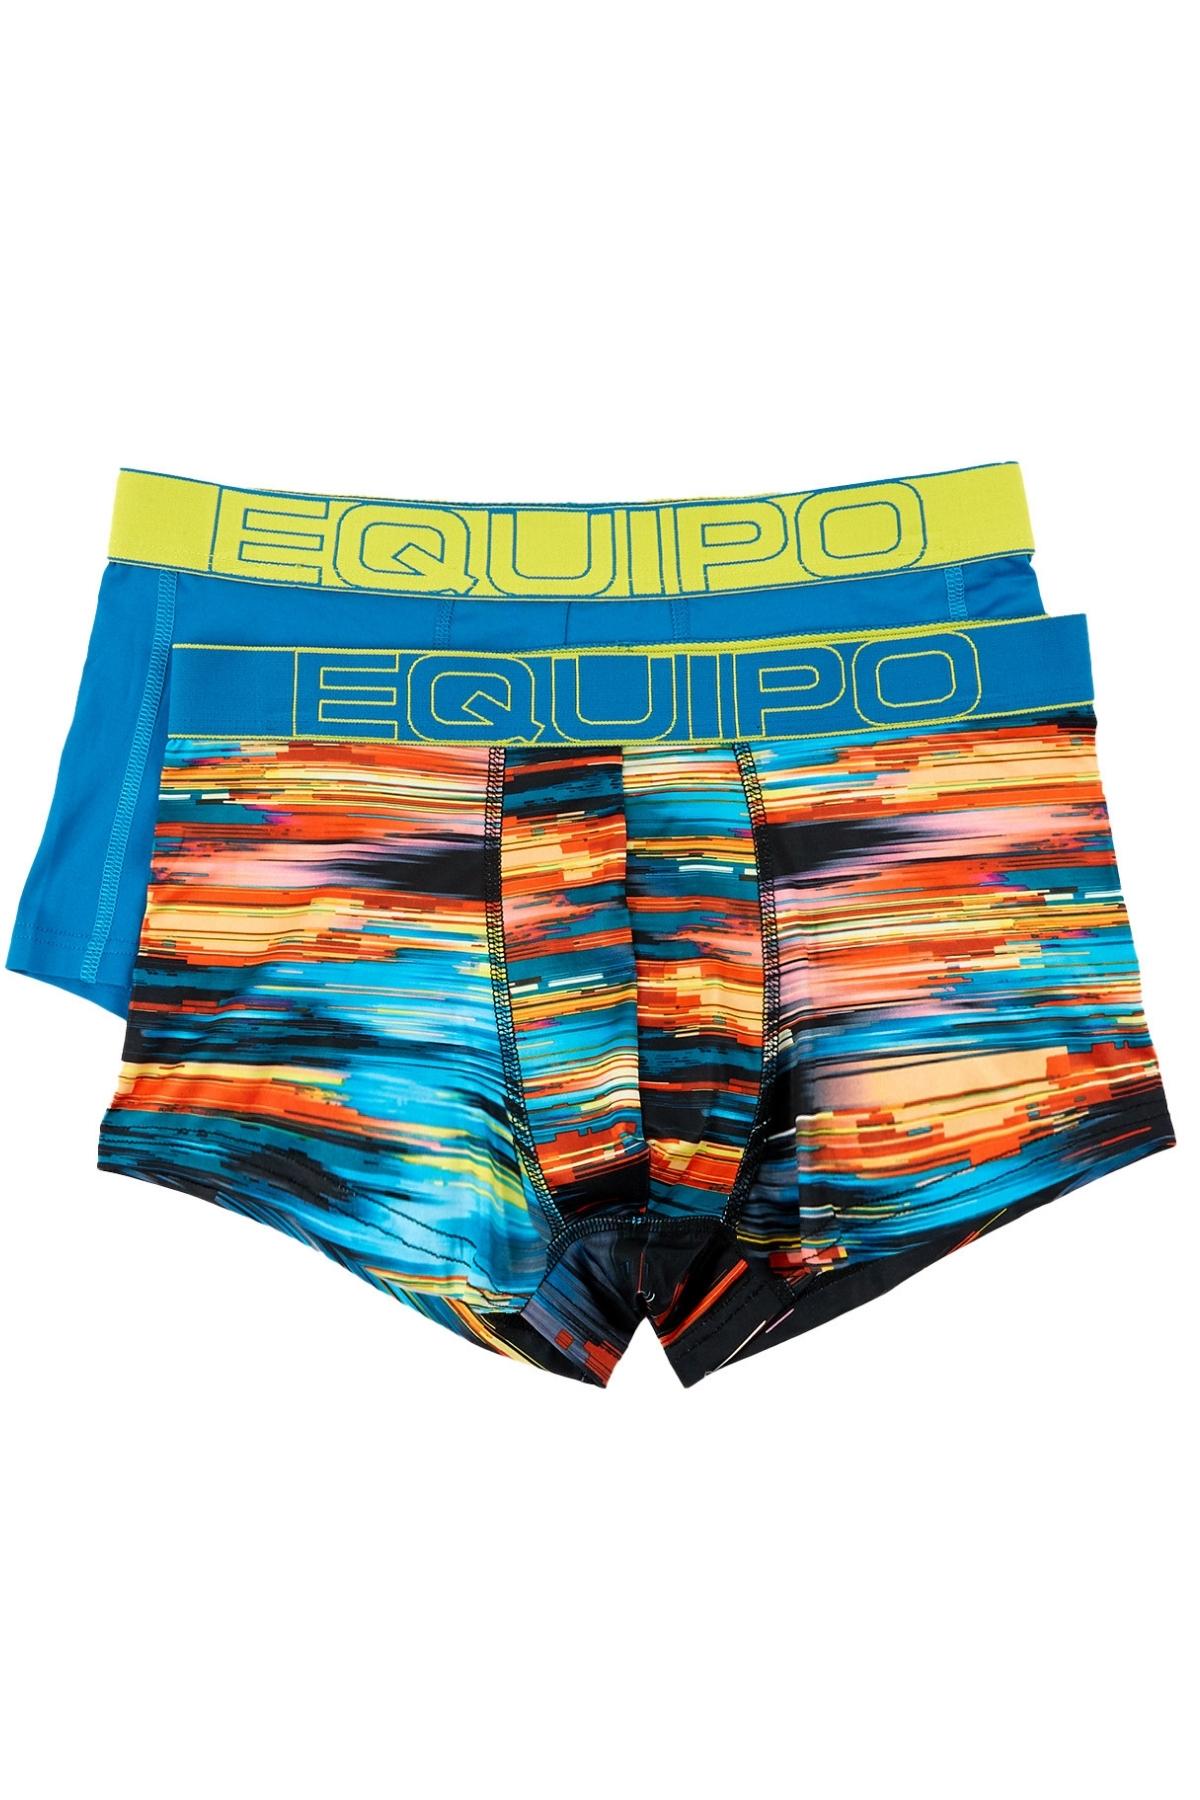 Equipo Blue and Lines Quick Dry Performace 2-Pack Trunks